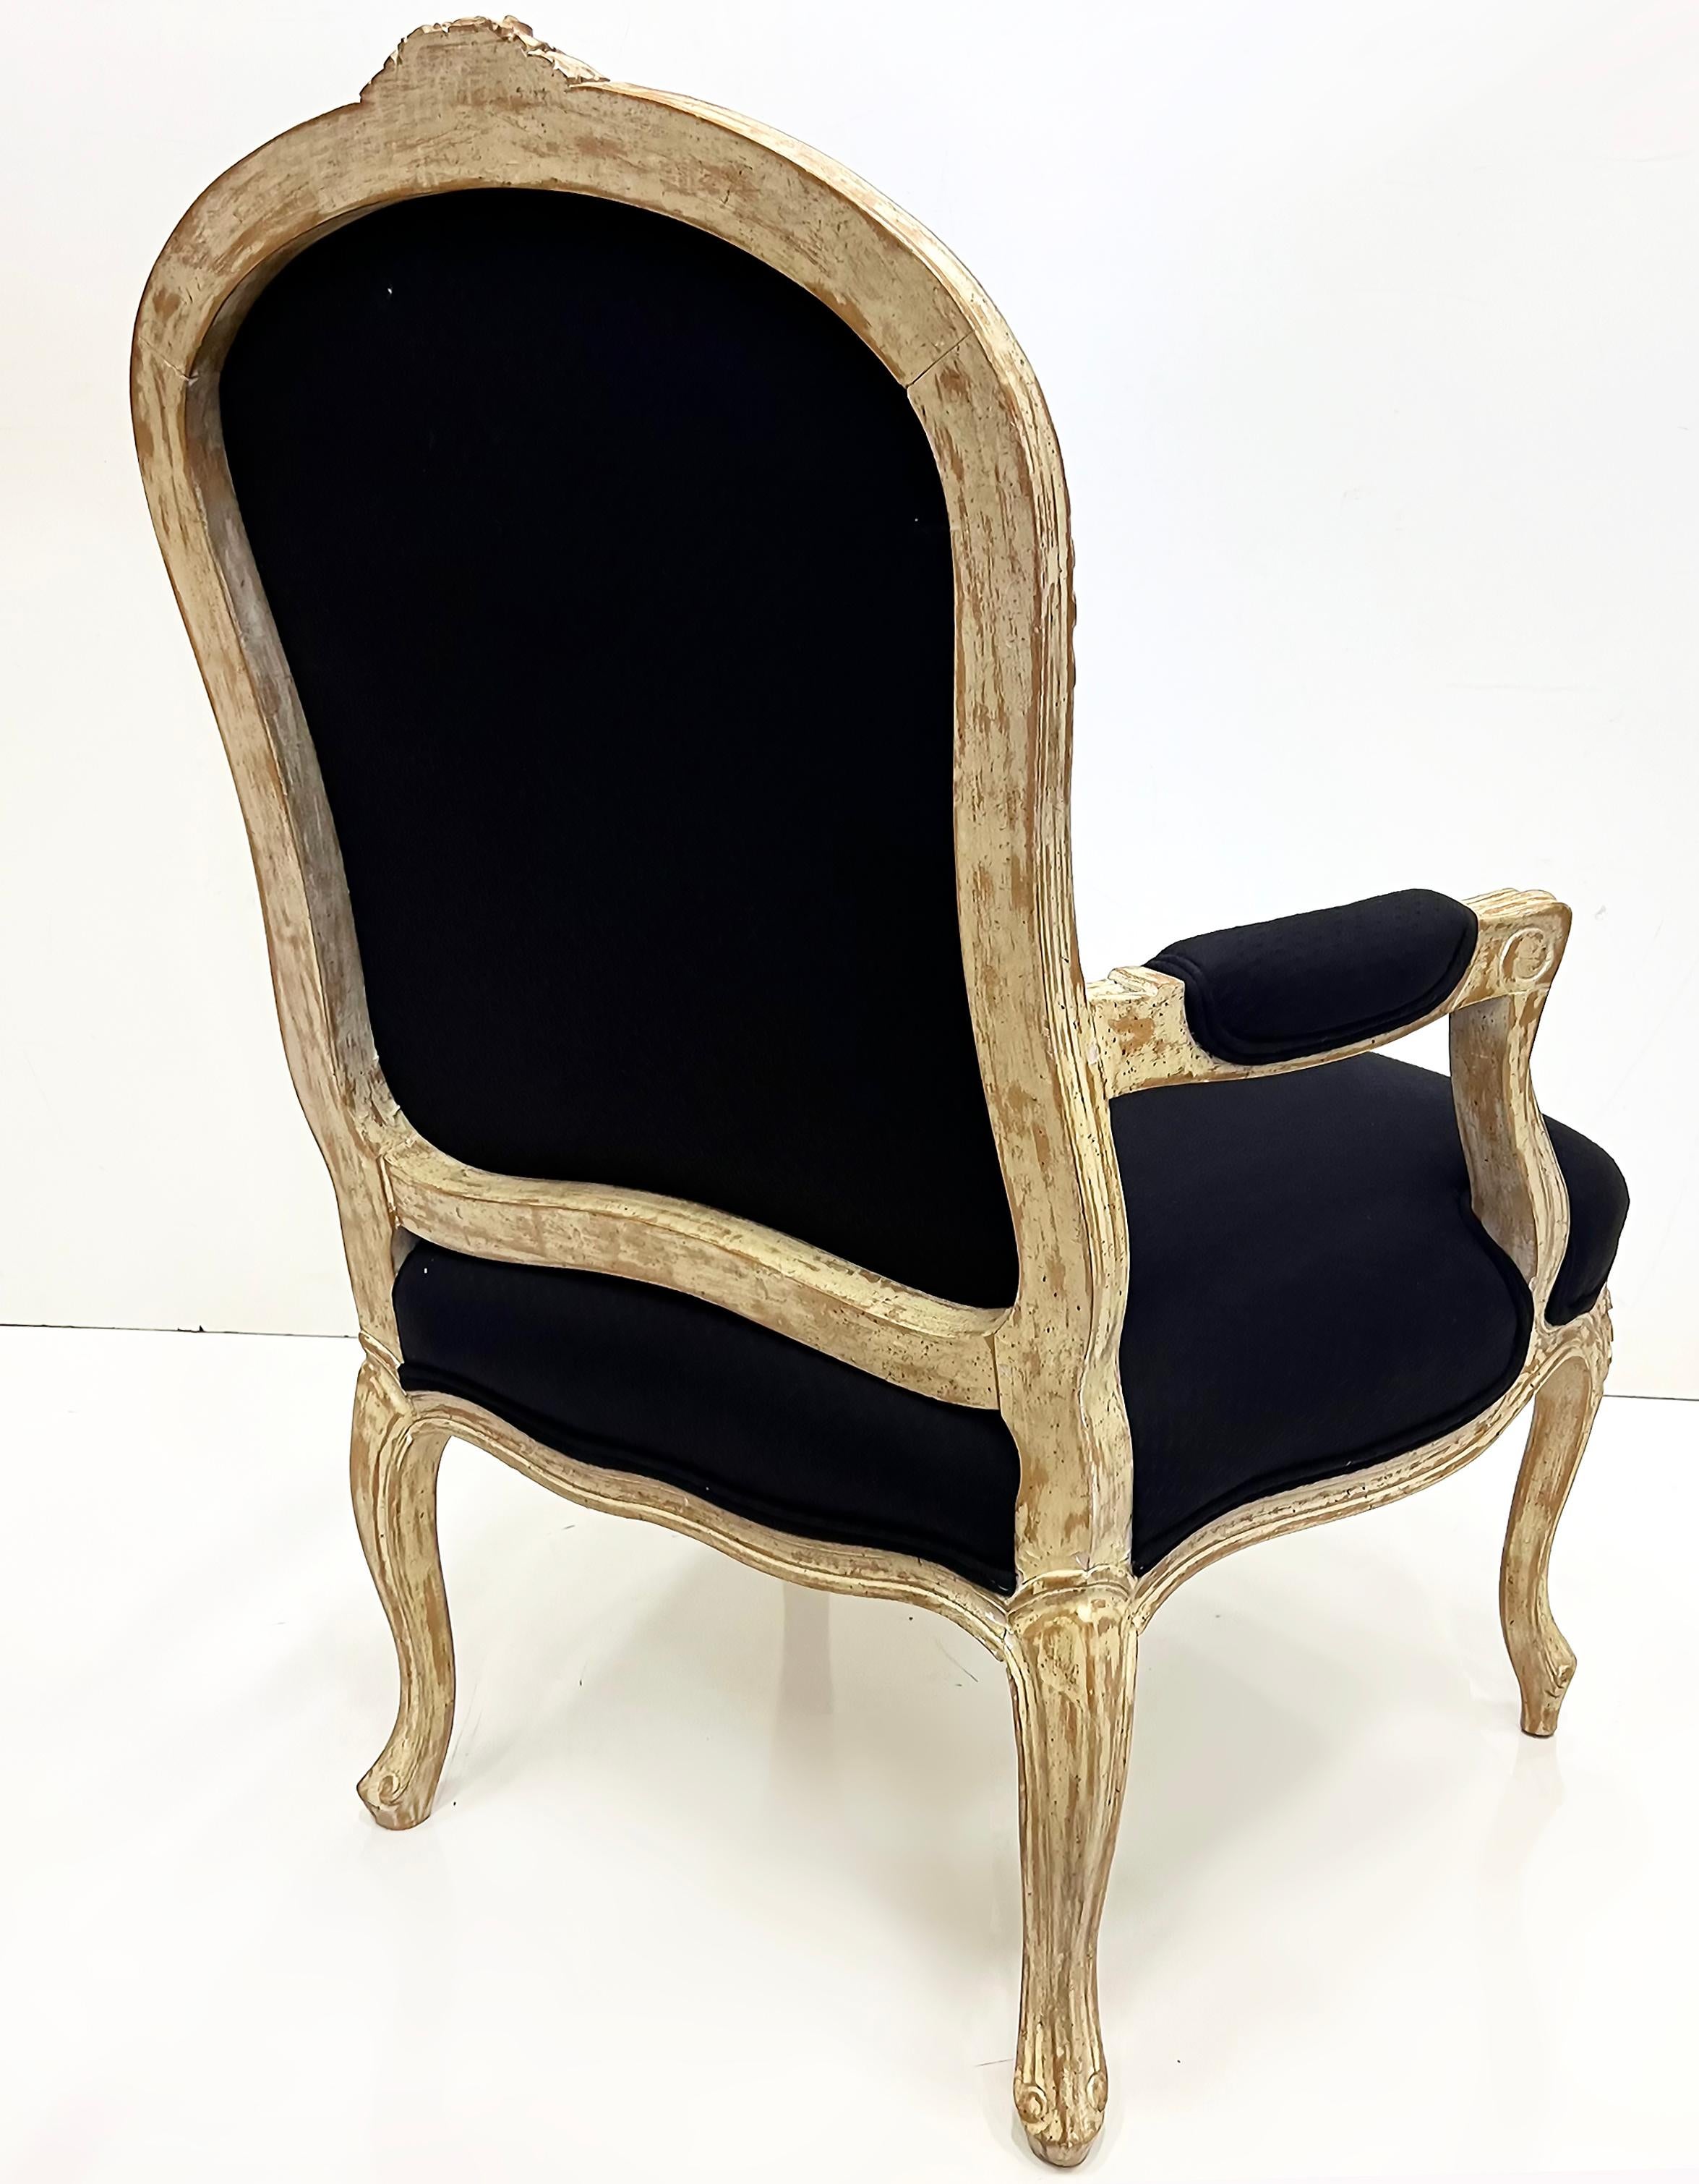 Fabric Substantial Vintage Louis XV Style Fauteuil Chairs, Large Scale Pair For Sale